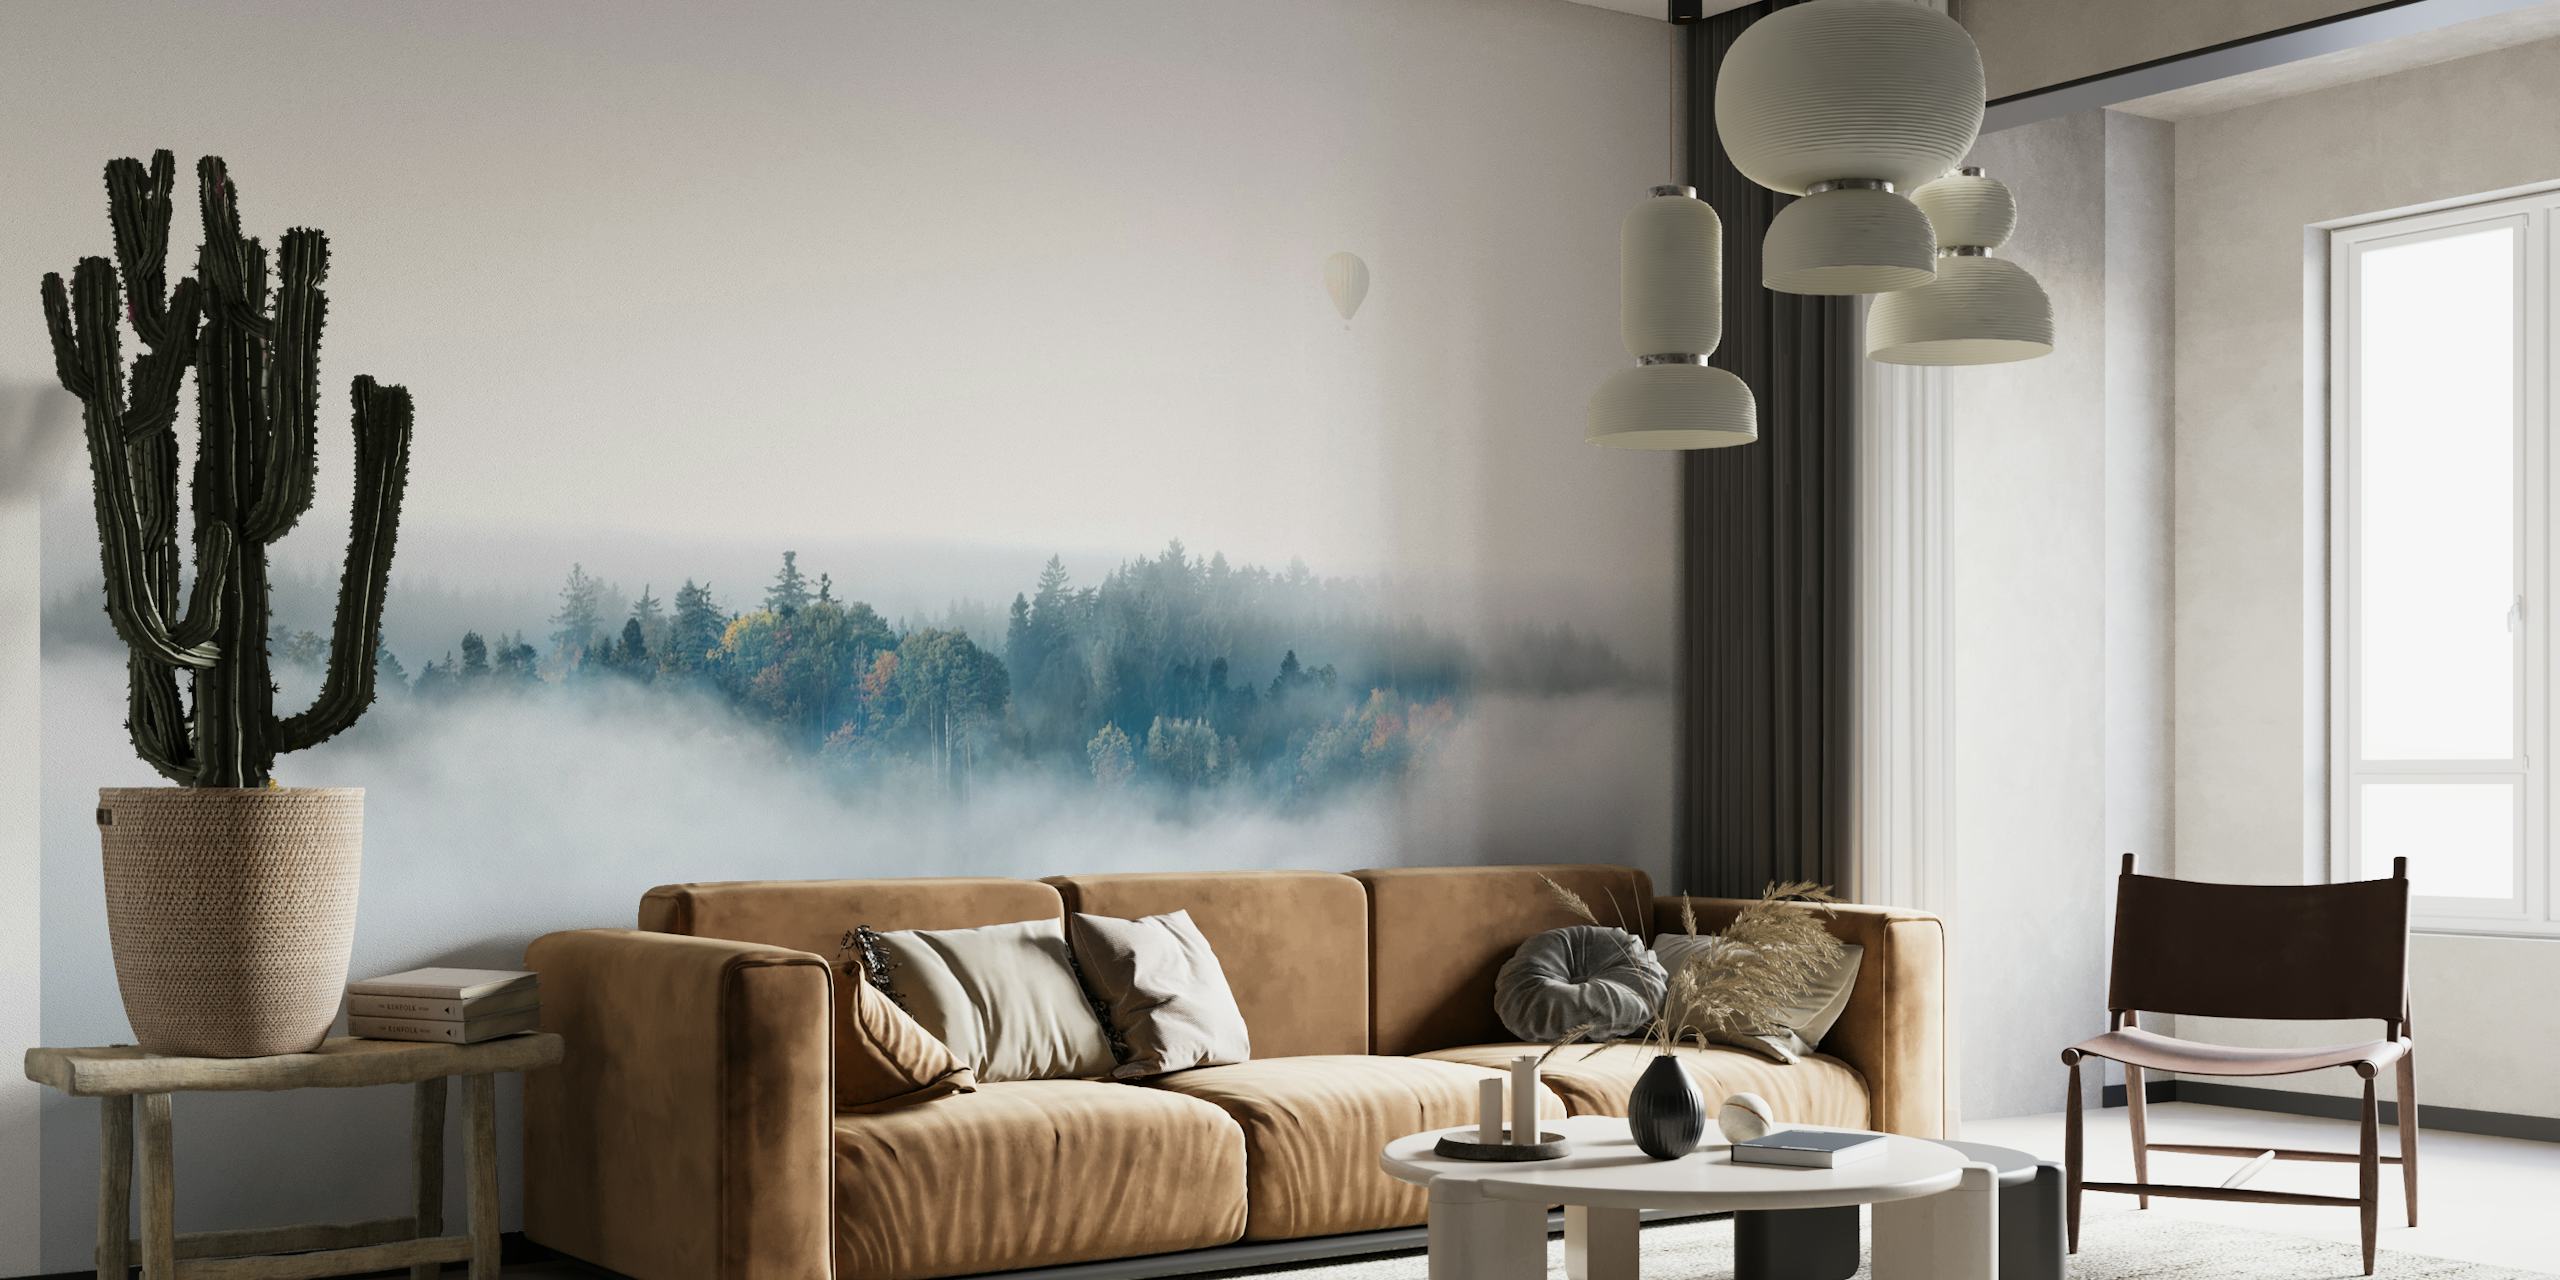 Misty forest landscape wall mural with trees shrouded in fog